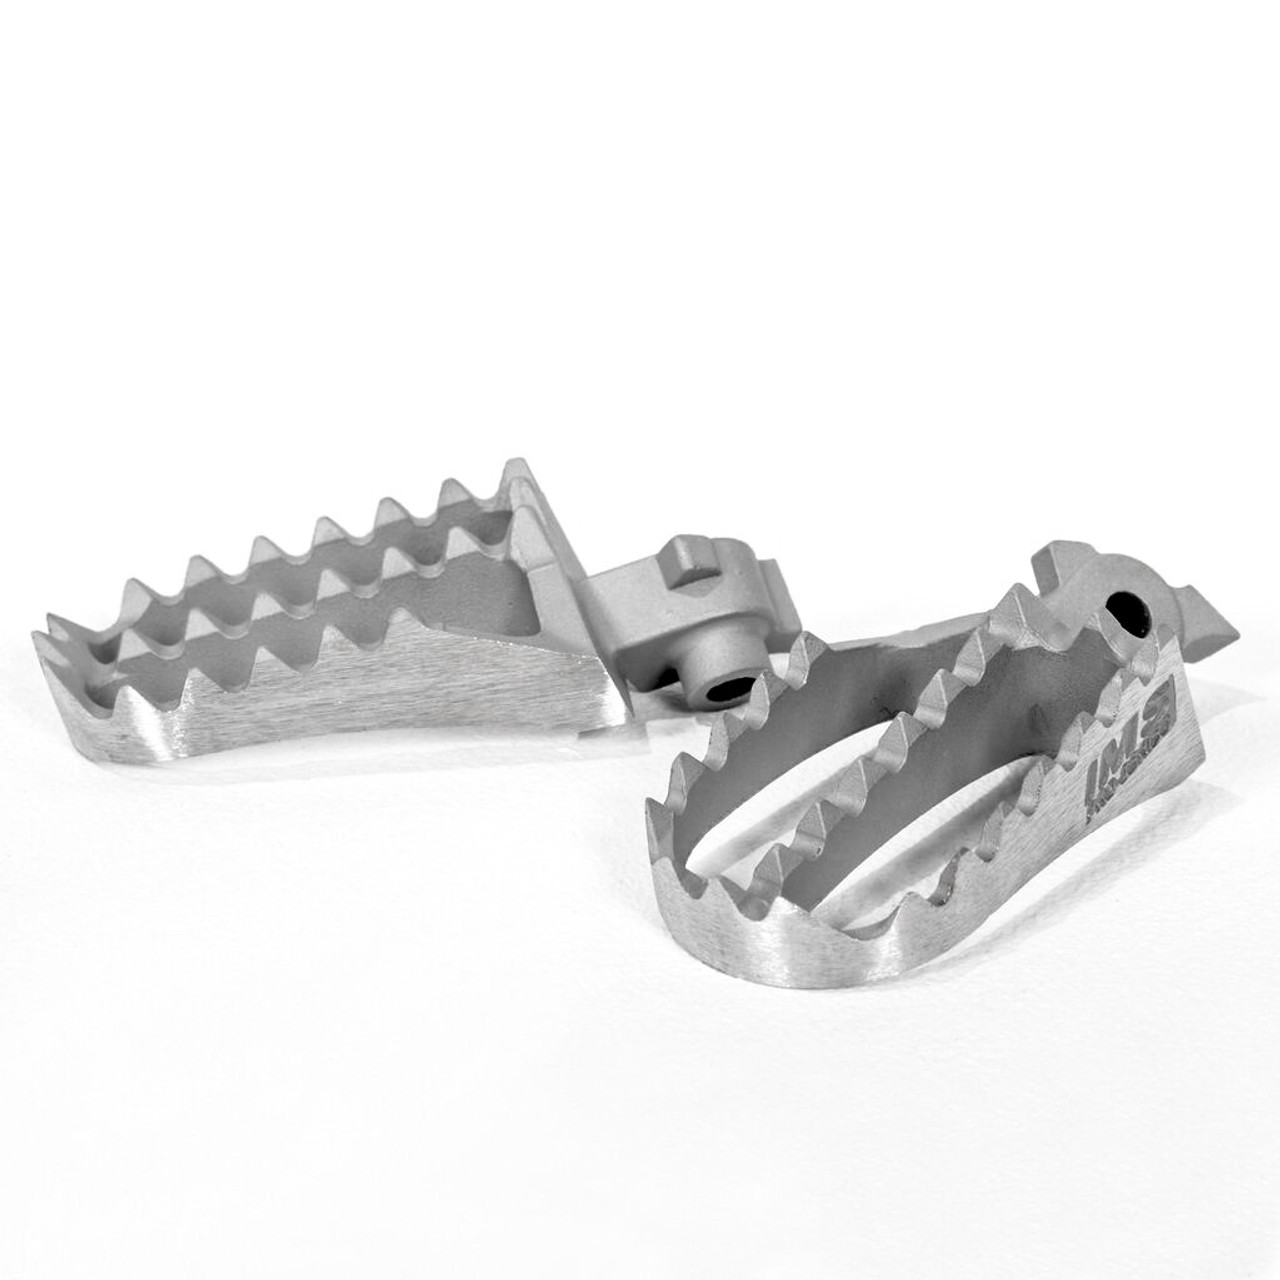 Ims New Pro Series Footpegs, 56-2126